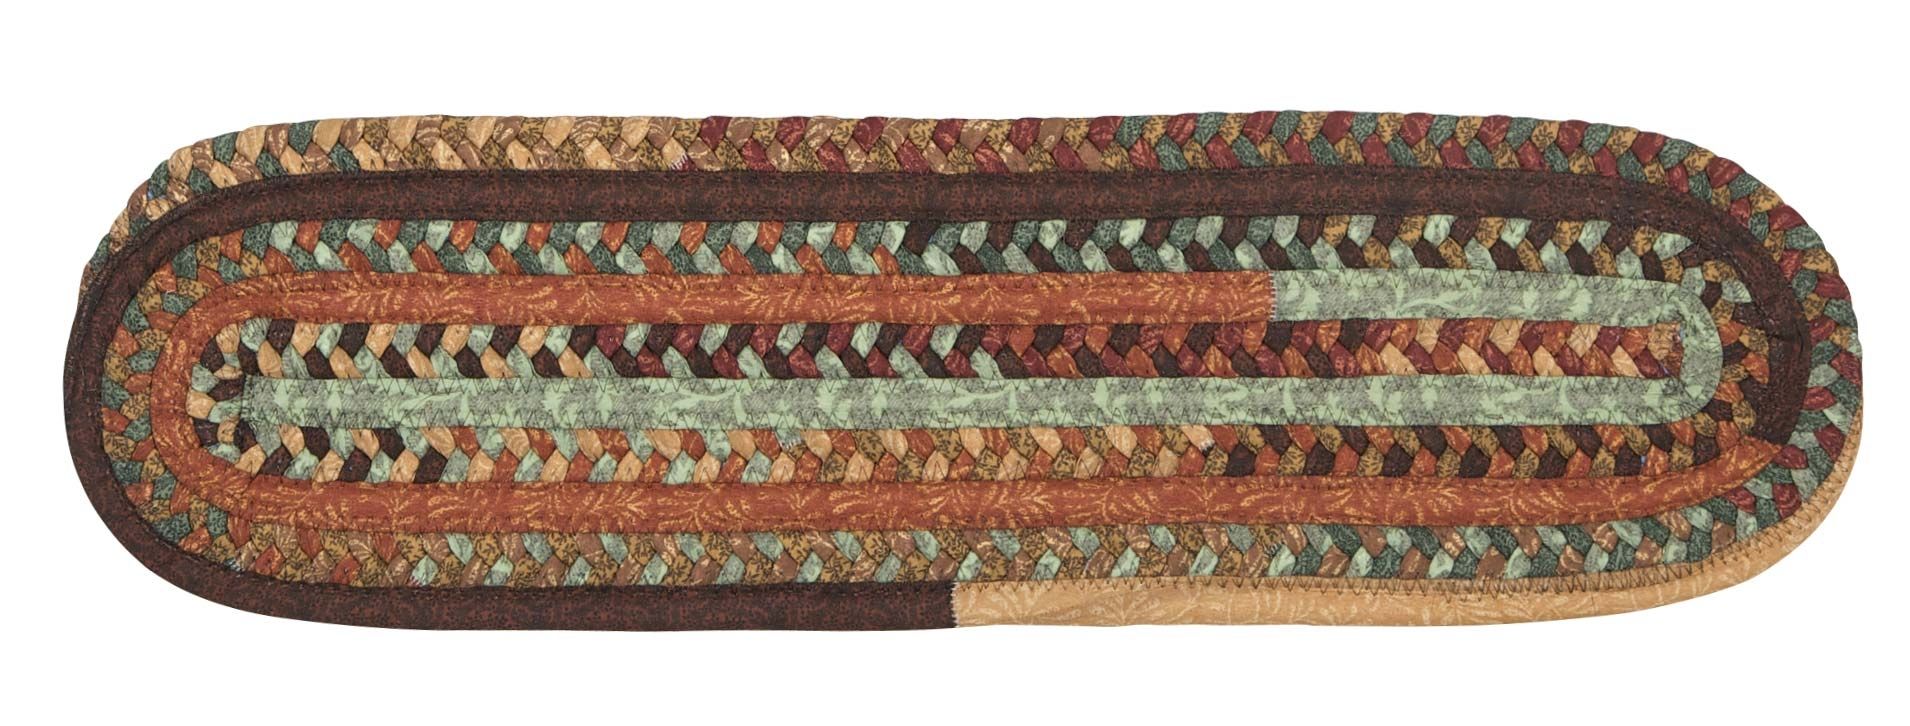 Olivera Stair Treads Colonial Mills Cmi Braided Rugs Outdoor With Braided Rug Stair Treads (View 14 of 15)